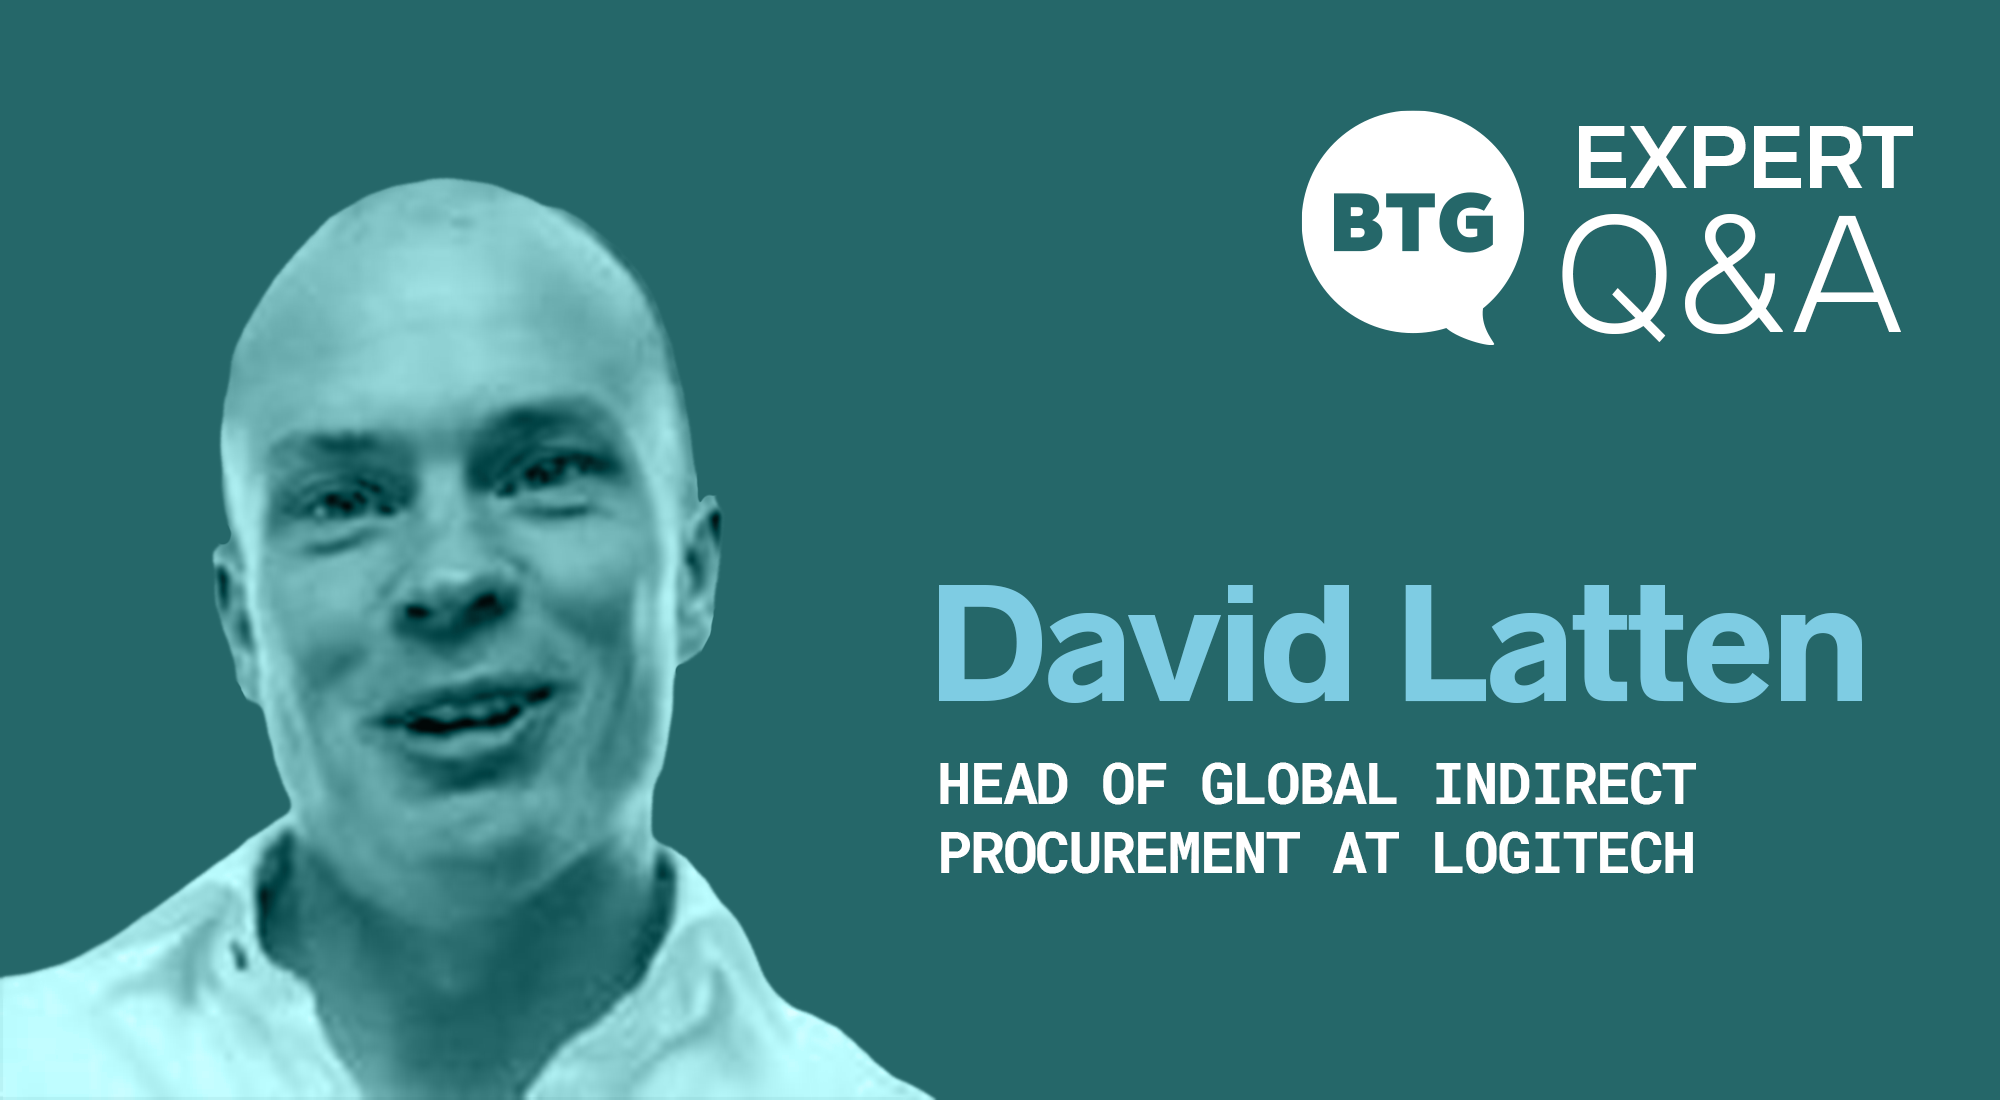 Photo of David Latten, Head of Indirect Procurement of Logitech with name, title, and BTG Expert Q&A logo